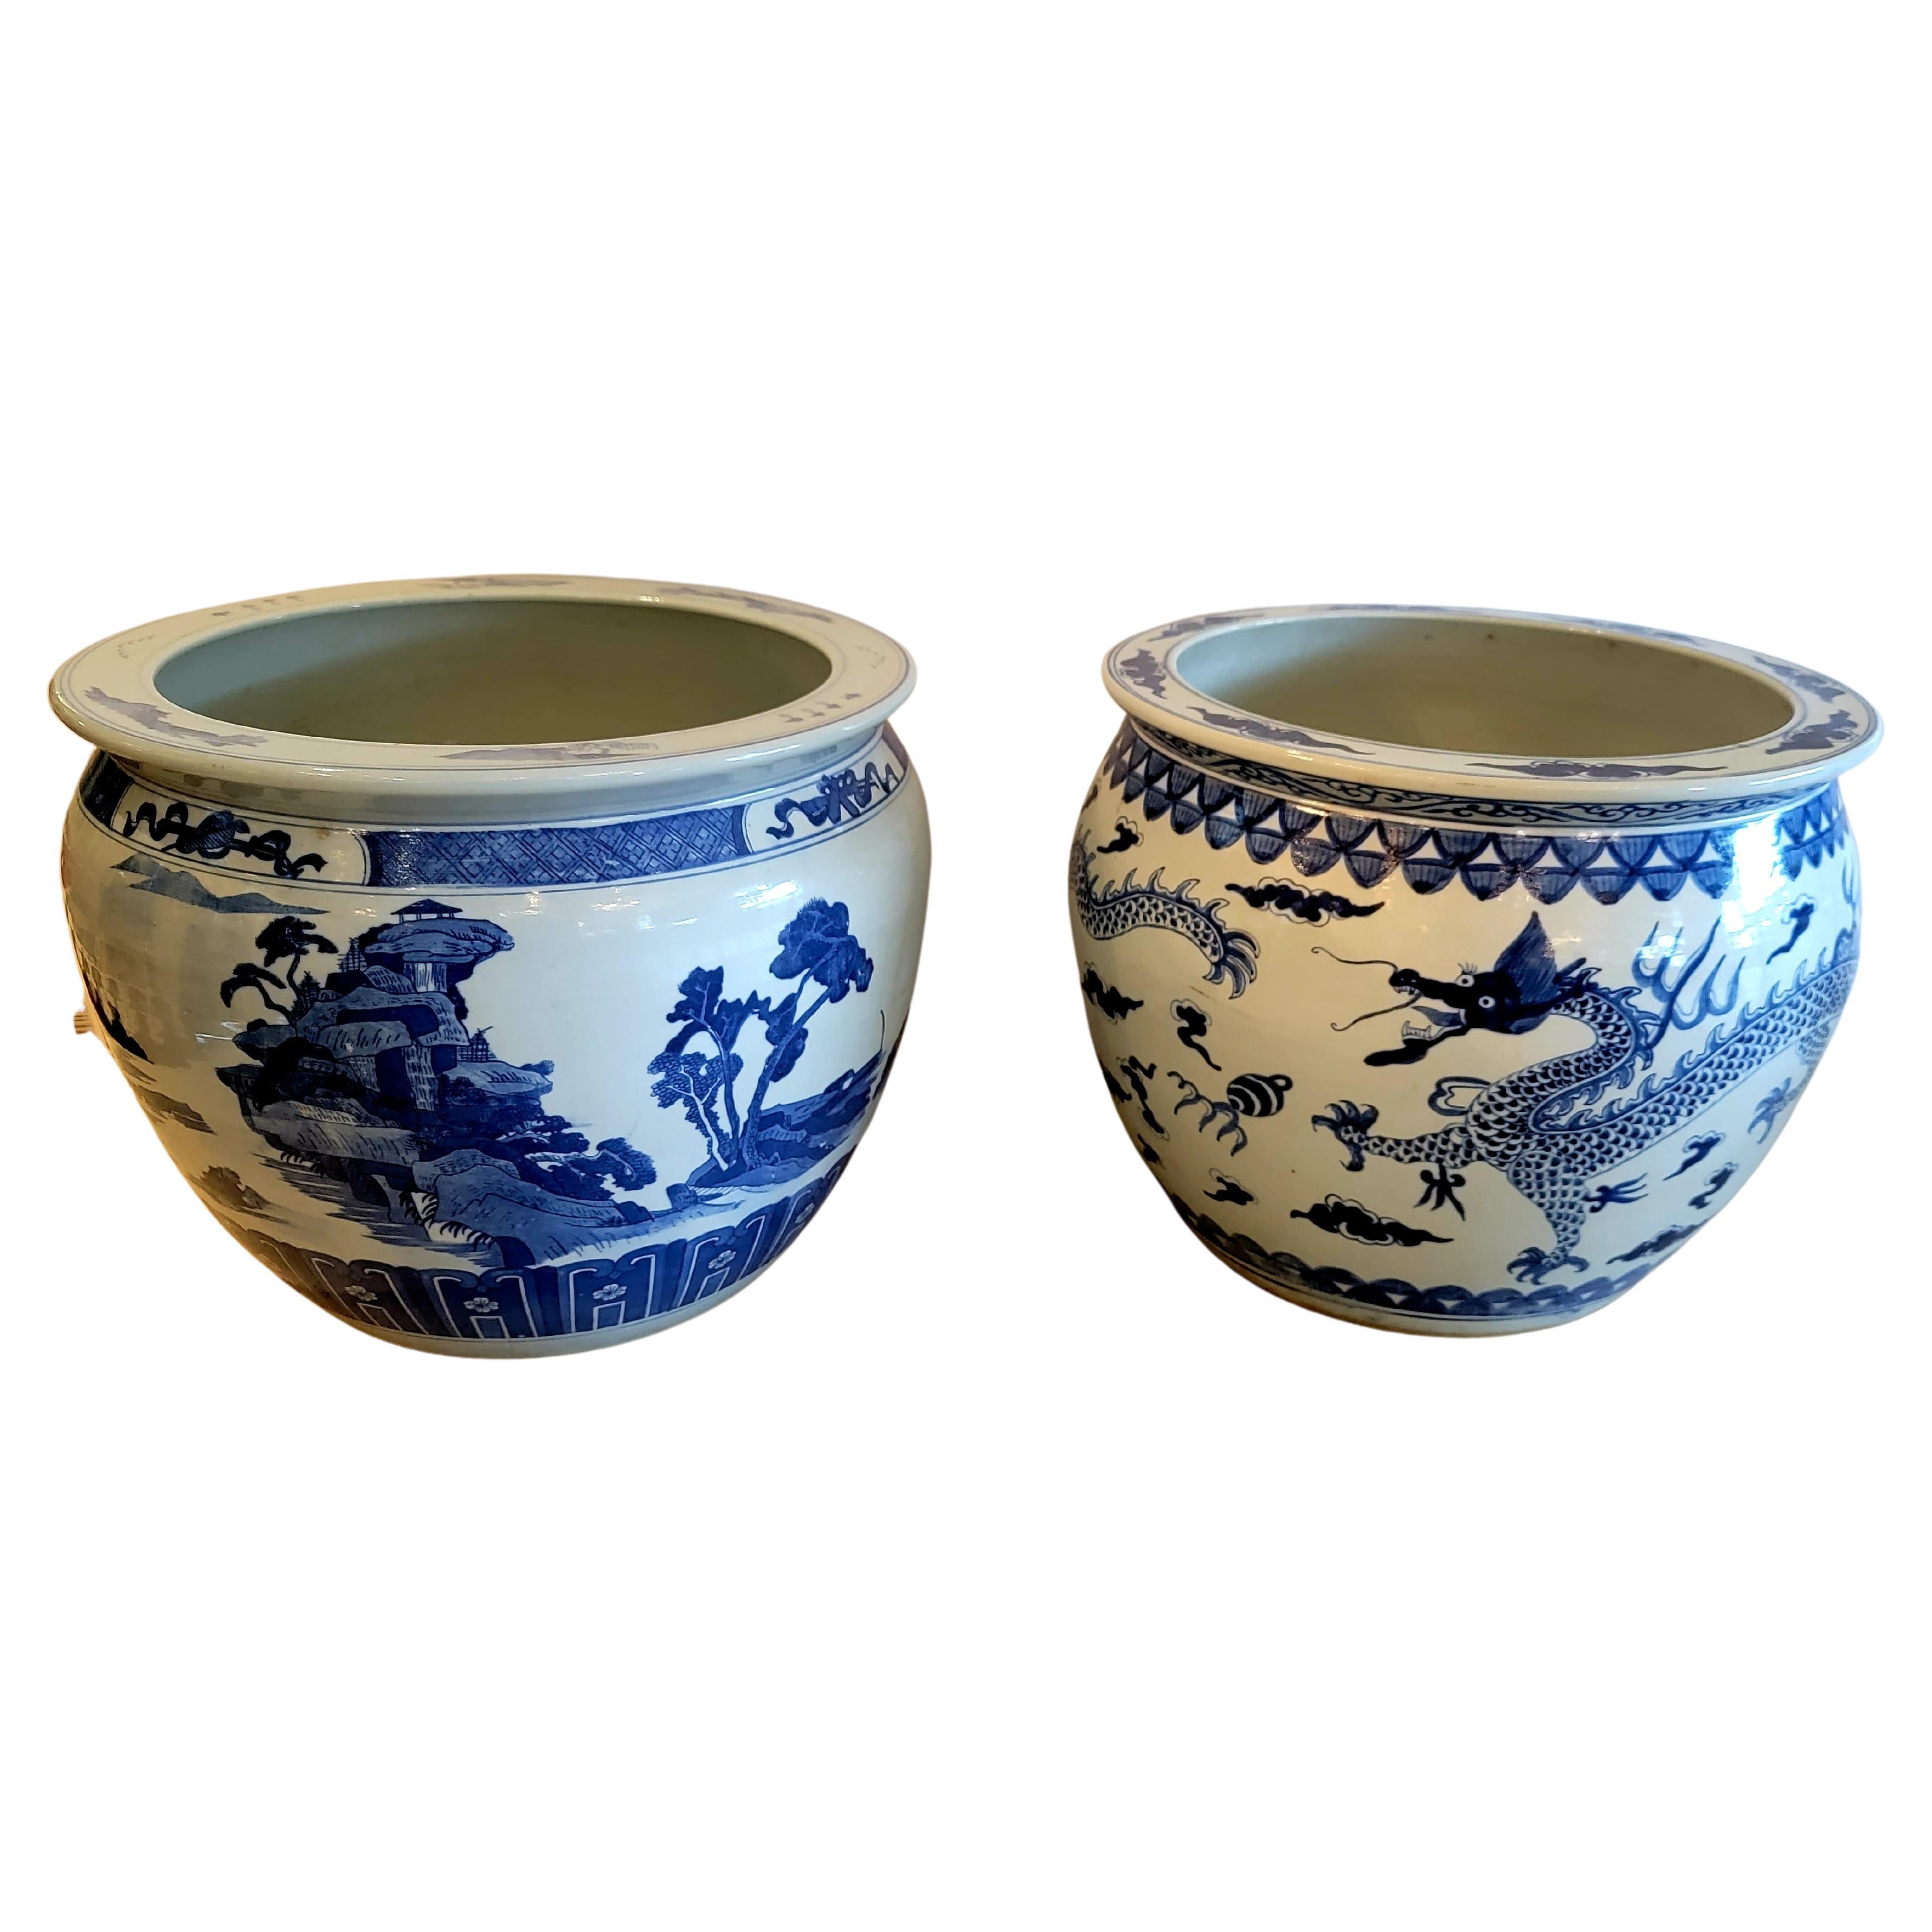 Lovely Pair of Blue & White Chinese Ceramic Planters